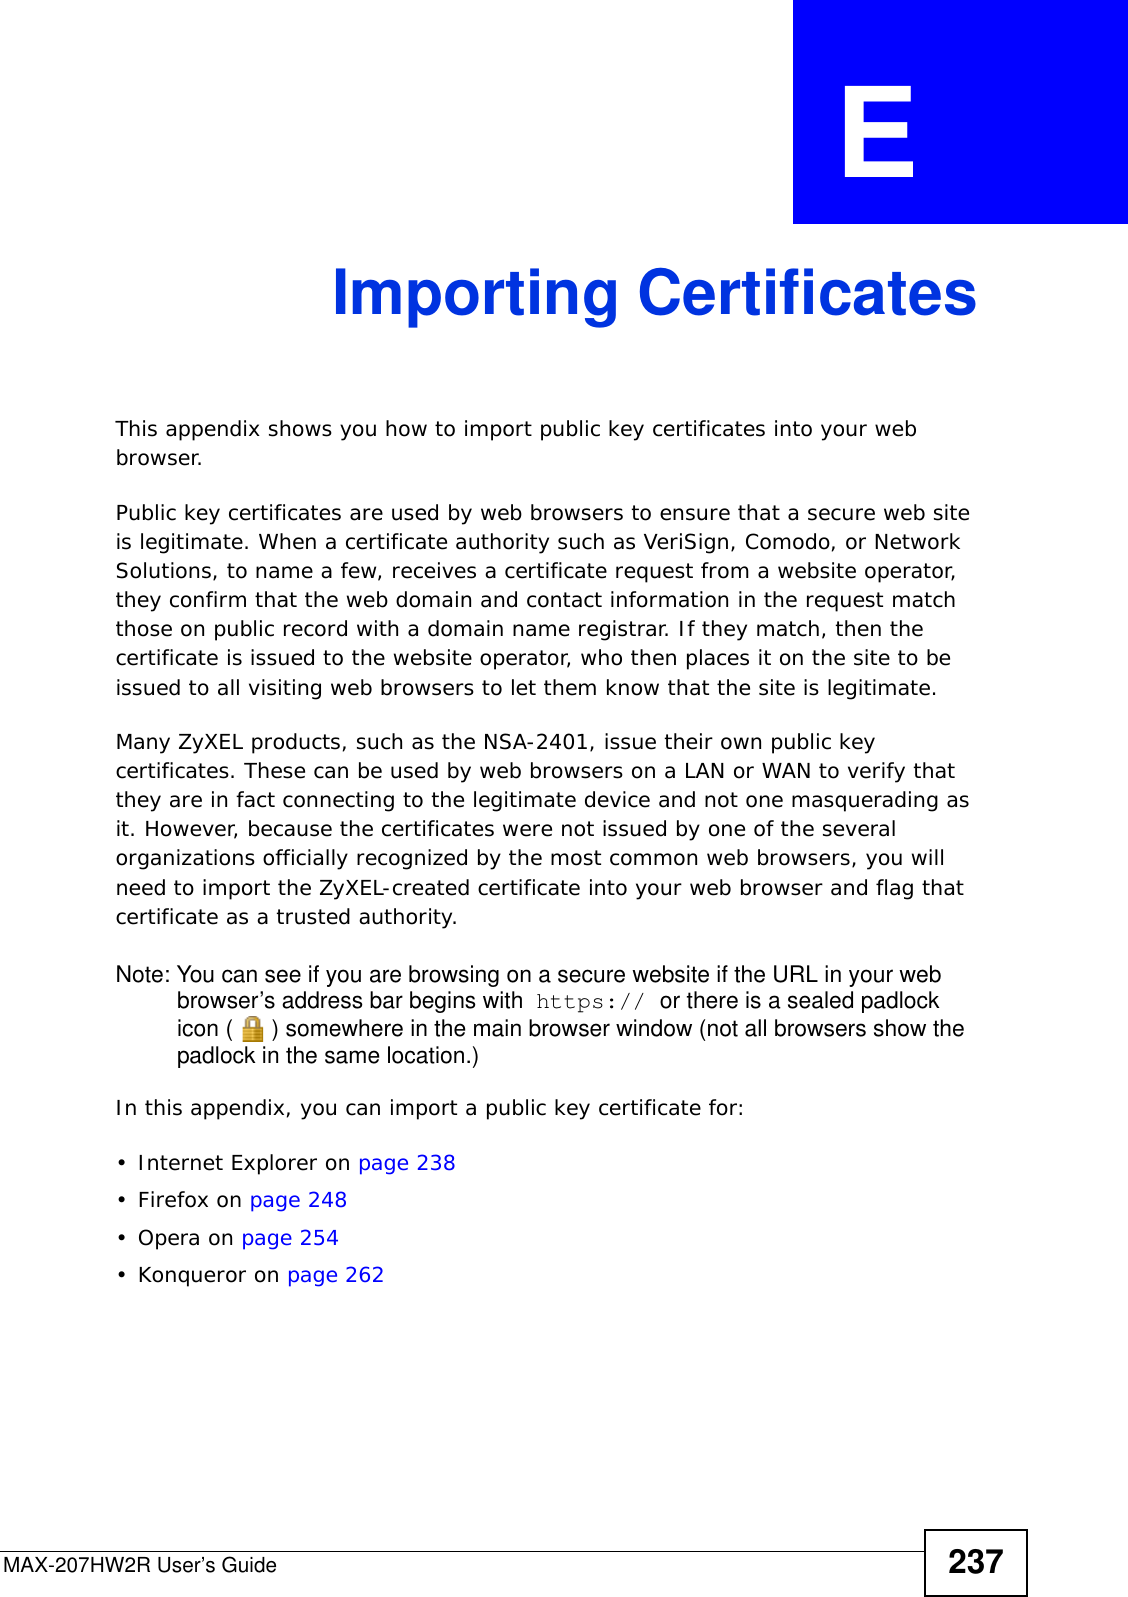 MAX-207HW2R User’s Guide 237APPENDIX  E Importing CertificatesThis appendix shows you how to import public key certificates into your web browser. Public key certificates are used by web browsers to ensure that a secure web site is legitimate. When a certificate authority such as VeriSign, Comodo, or Network Solutions, to name a few, receives a certificate request from a website operator, they confirm that the web domain and contact information in the request match those on public record with a domain name registrar. If they match, then the certificate is issued to the website operator, who then places it on the site to be issued to all visiting web browsers to let them know that the site is legitimate.Many ZyXEL products, such as the NSA-2401, issue their own public key certificates. These can be used by web browsers on a LAN or WAN to verify that they are in fact connecting to the legitimate device and not one masquerading as it. However, because the certificates were not issued by one of the several organizations officially recognized by the most common web browsers, you will need to import the ZyXEL-created certificate into your web browser and flag that certificate as a trusted authority.Note: You can see if you are browsing on a secure website if the URL in your web browser’s address bar begins with  https:// or there is a sealed padlock icon ( ) somewhere in the main browser window (not all browsers show the padlock in the same location.)In this appendix, you can import a public key certificate for:• Internet Explorer on page 238•Firefox on page 248•Opera on page 254• Konqueror on page 262